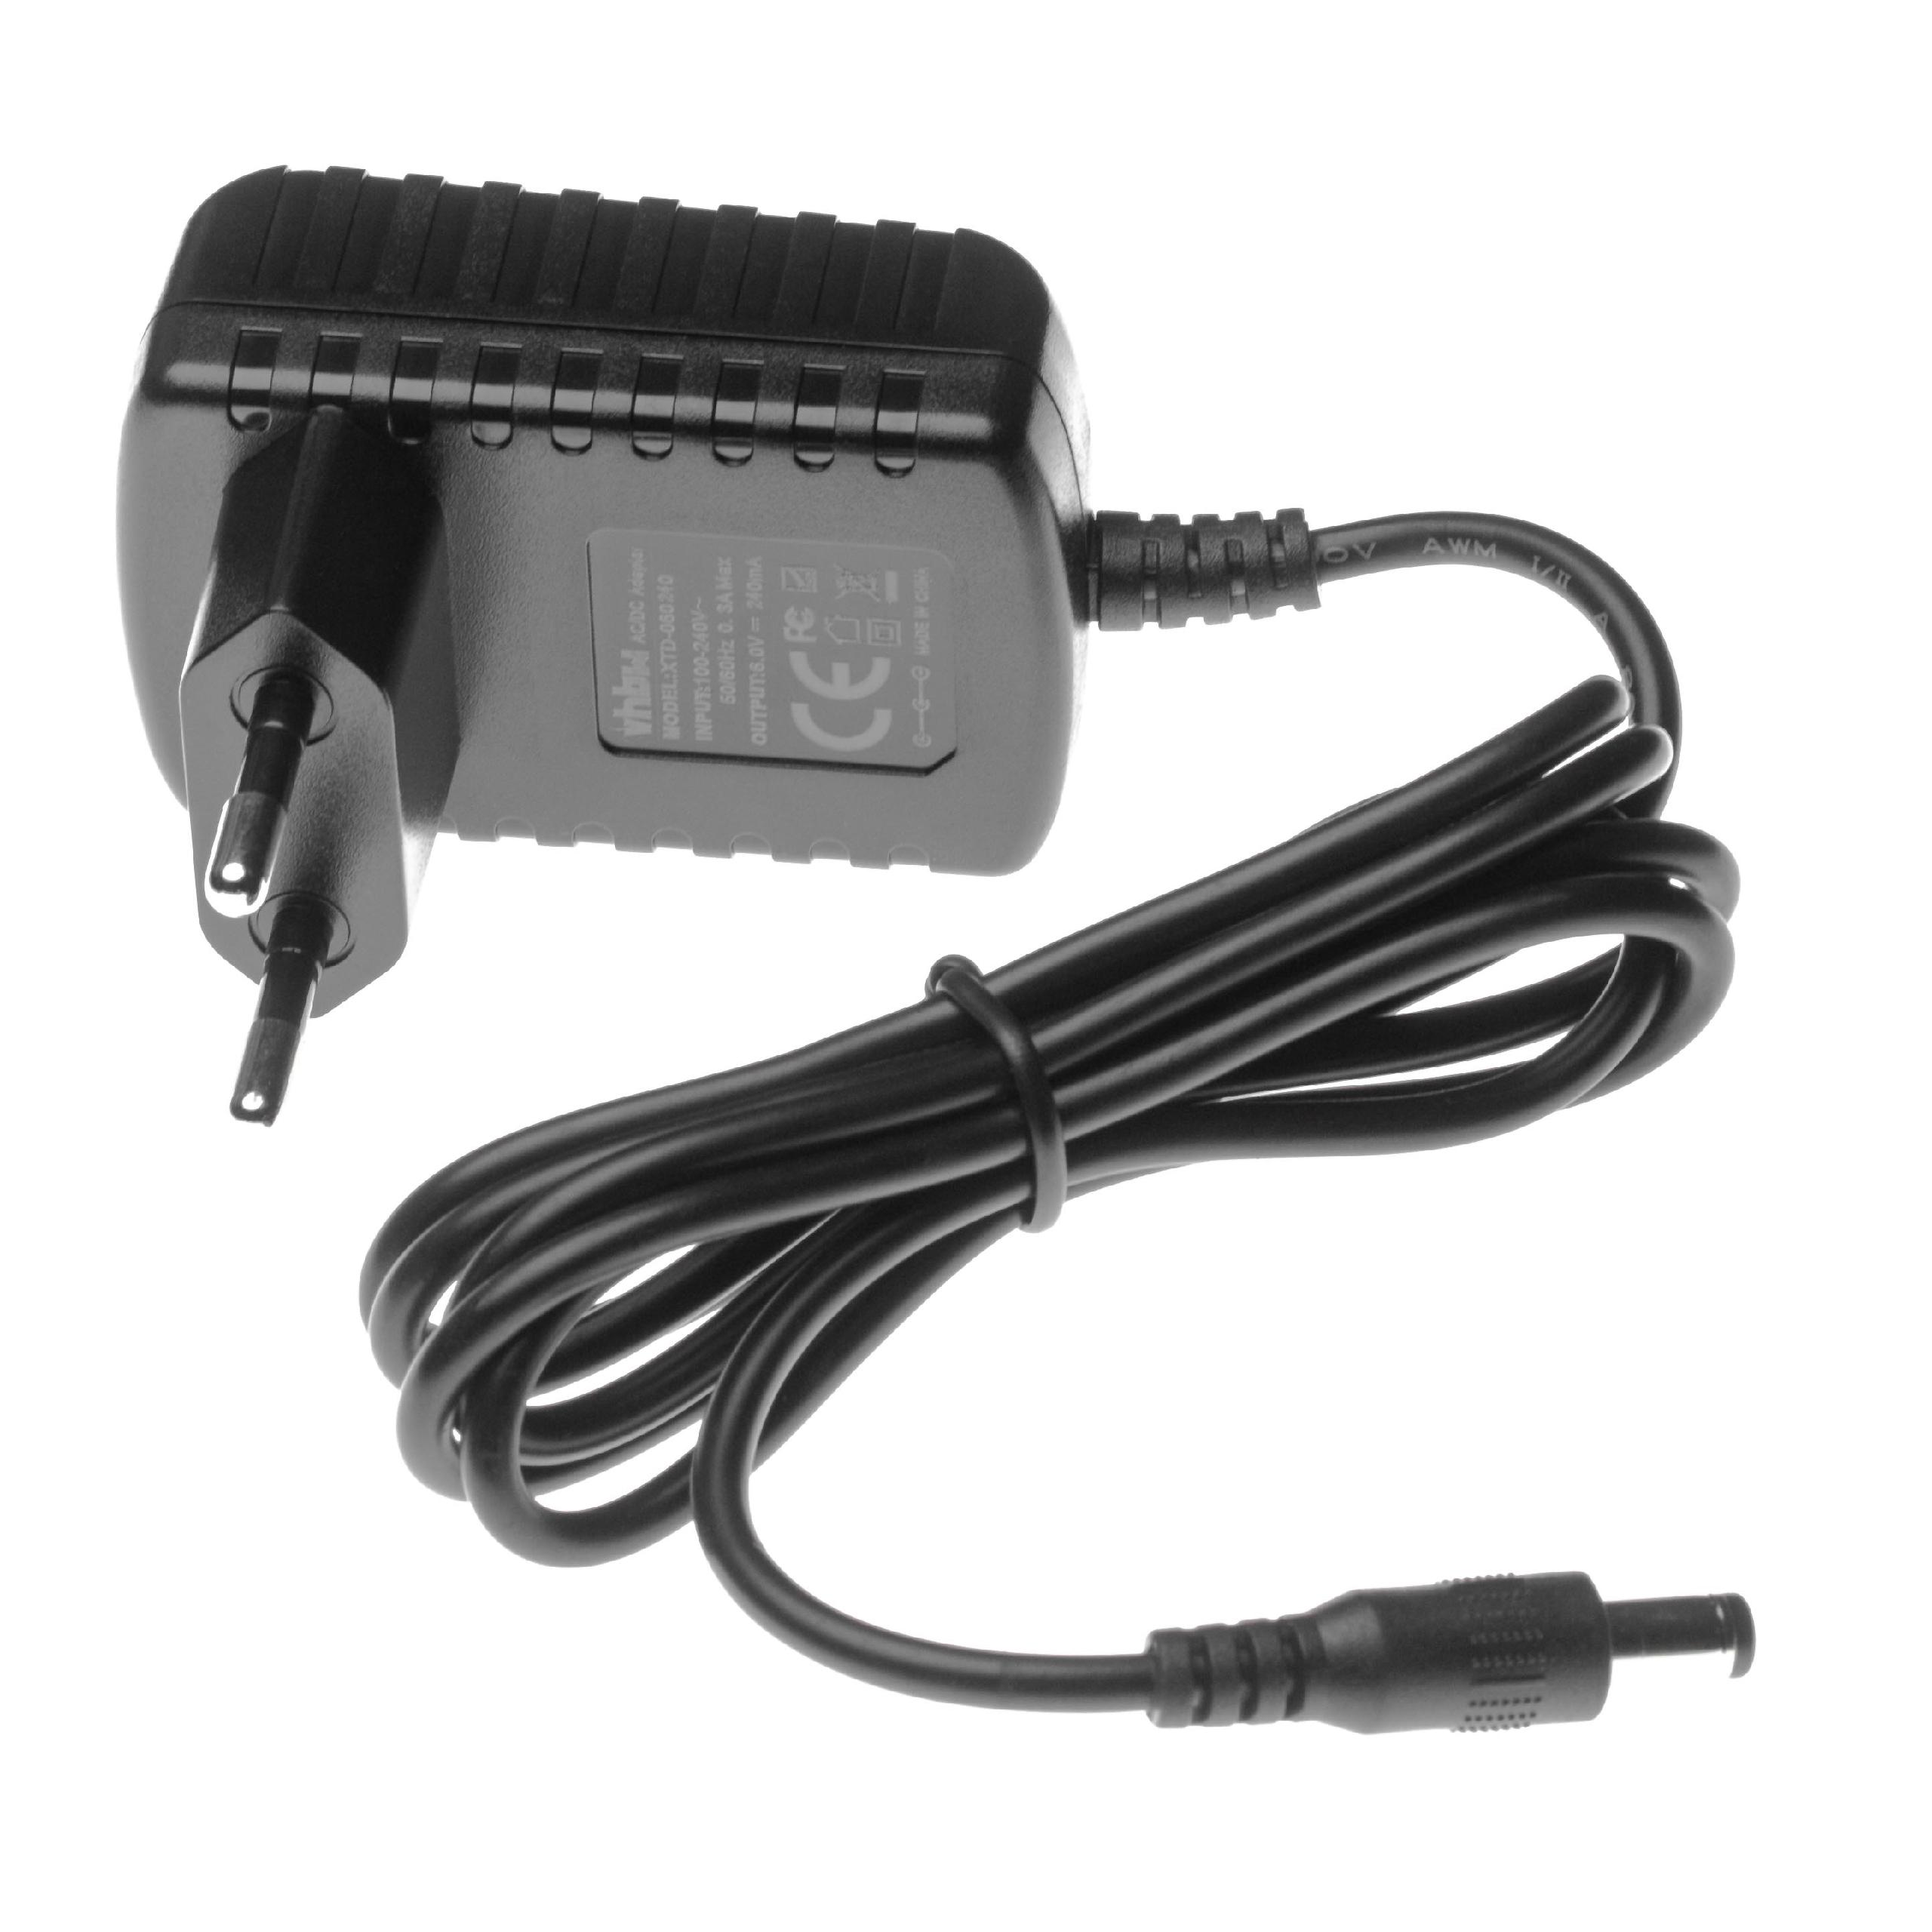 Mains Power Adapter replaces Casio AD-A60024SG-P1-OP1, AD-A60024SG for Casio Receipt Printing Calculator